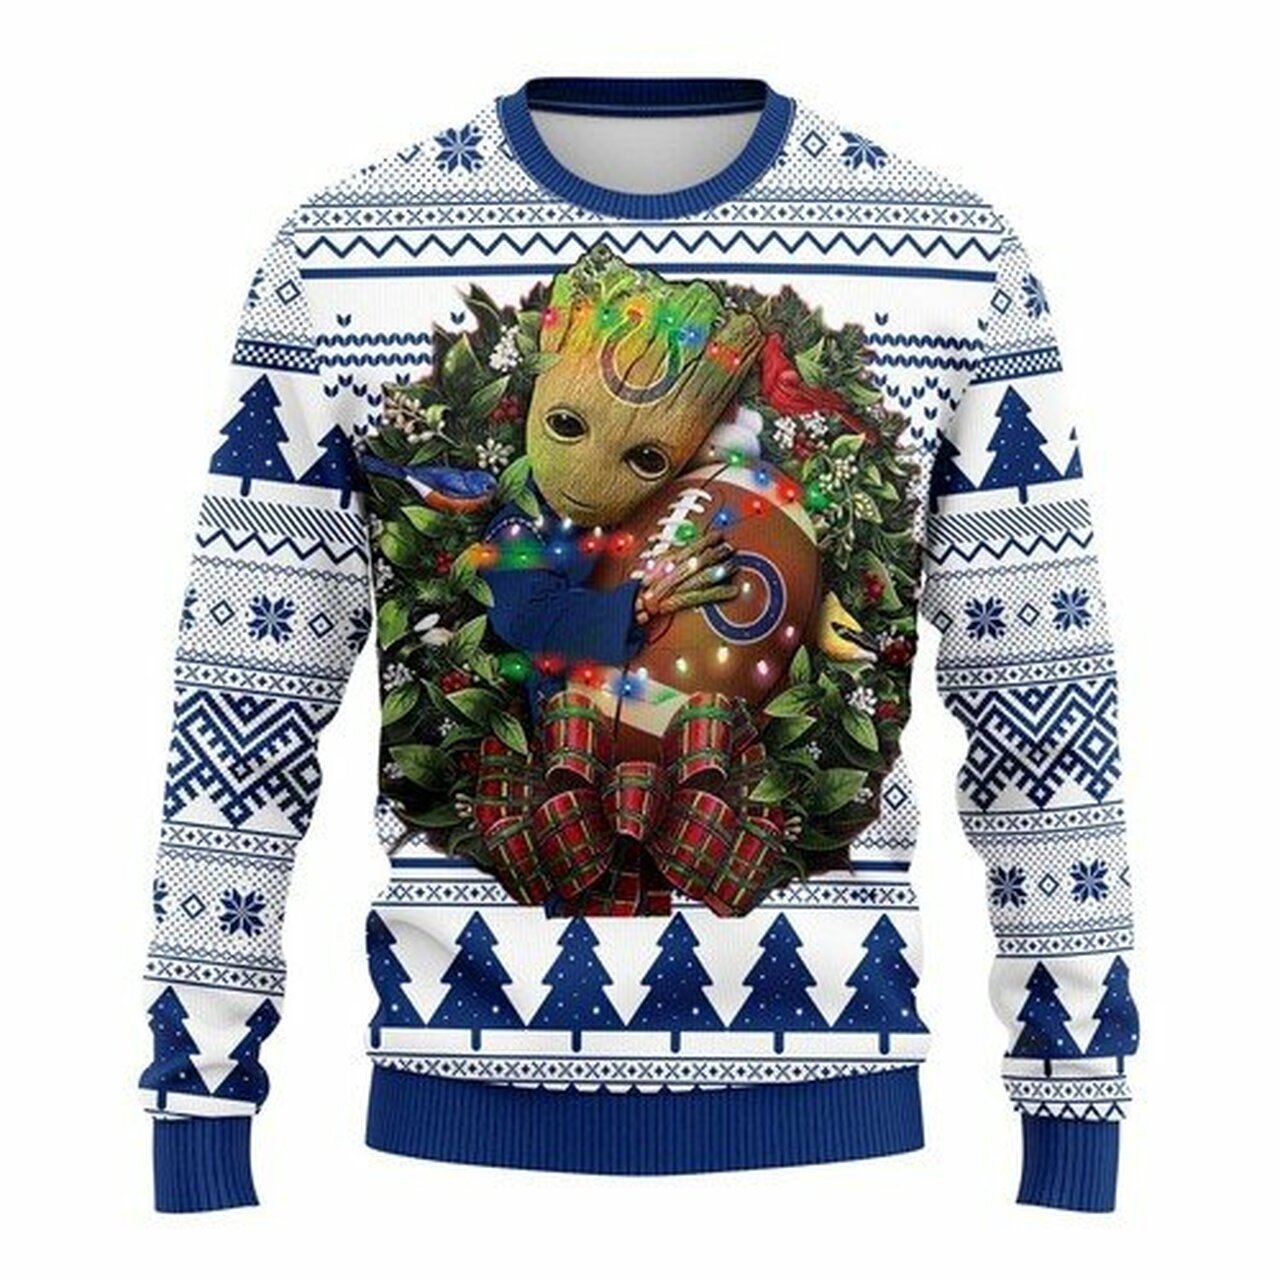 NFL Indianapolis Colts Groot hug ugly christmas sweater